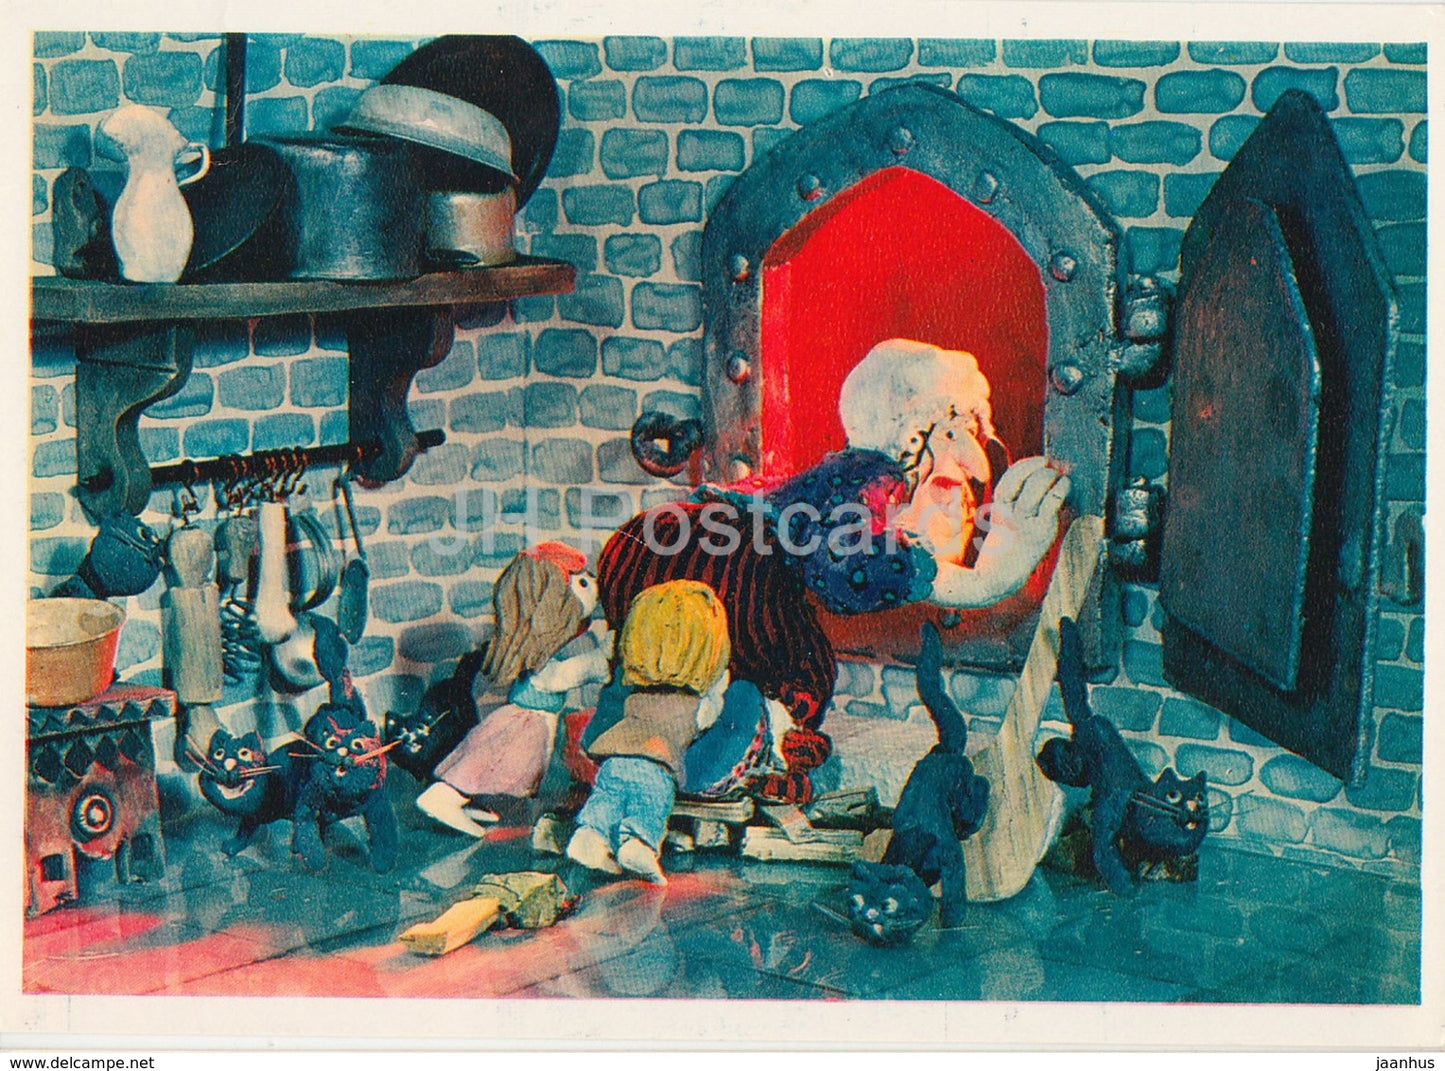 Hansel and Gretel by Brothers Grimm - stove - cats - dolls - Fairy Tale - 1975 - Russia USSR - unused - JH Postcards